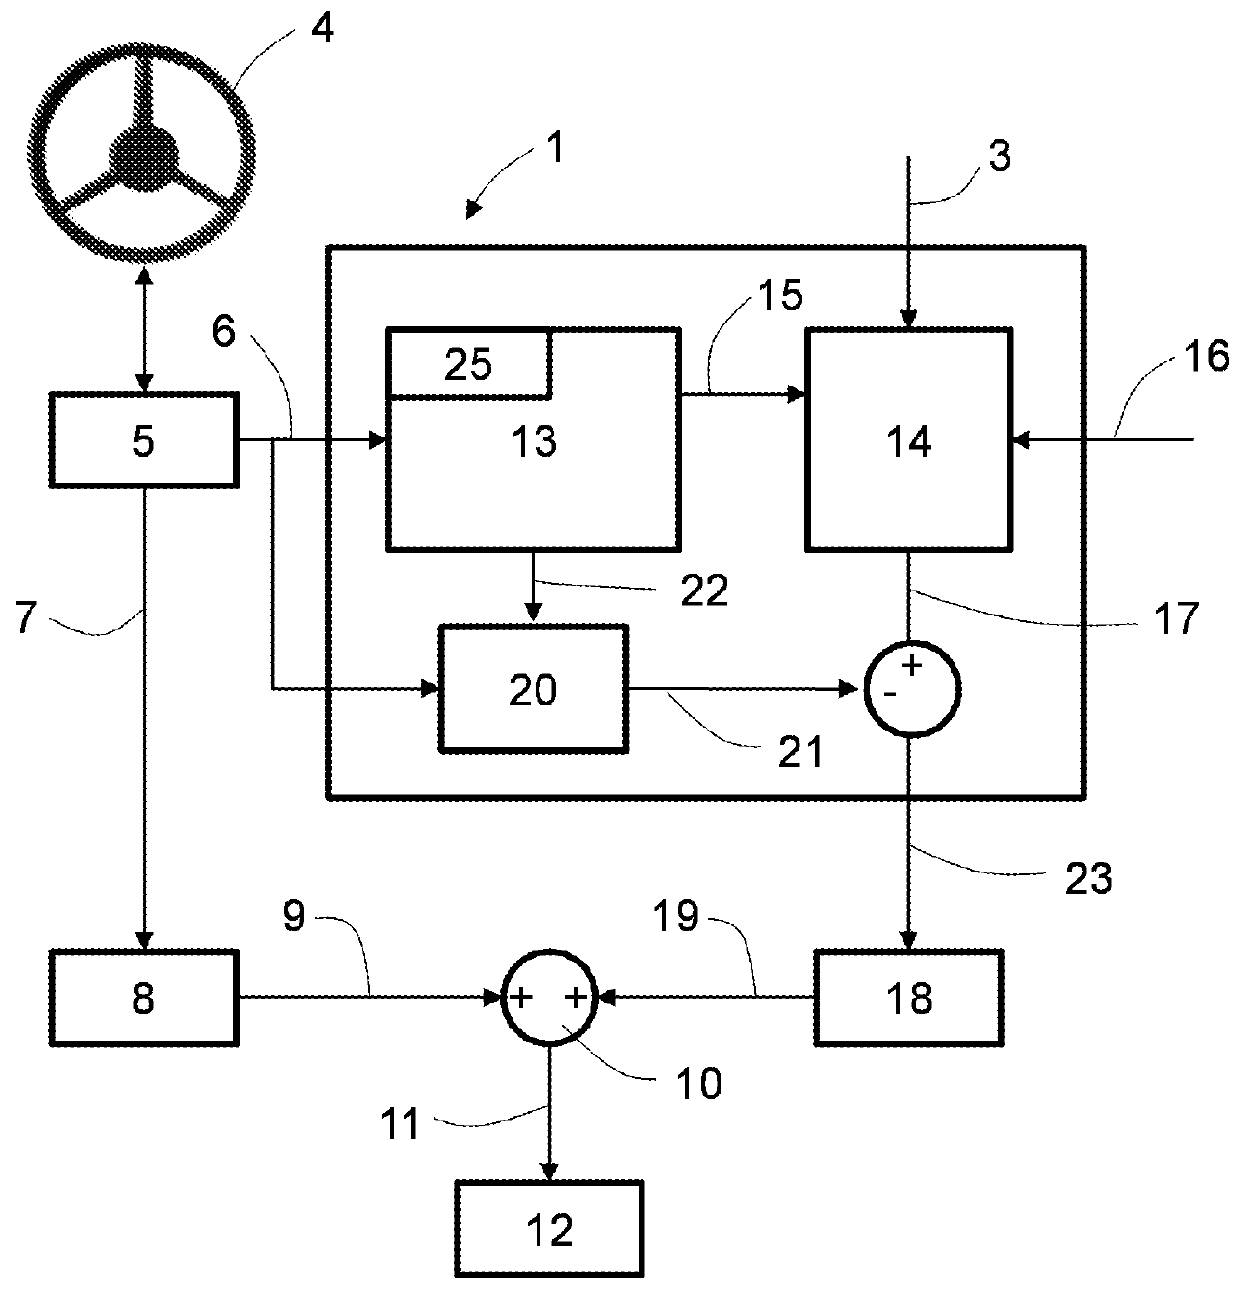 Steer torque manager for an advanced driver assistance system of a road vehicle